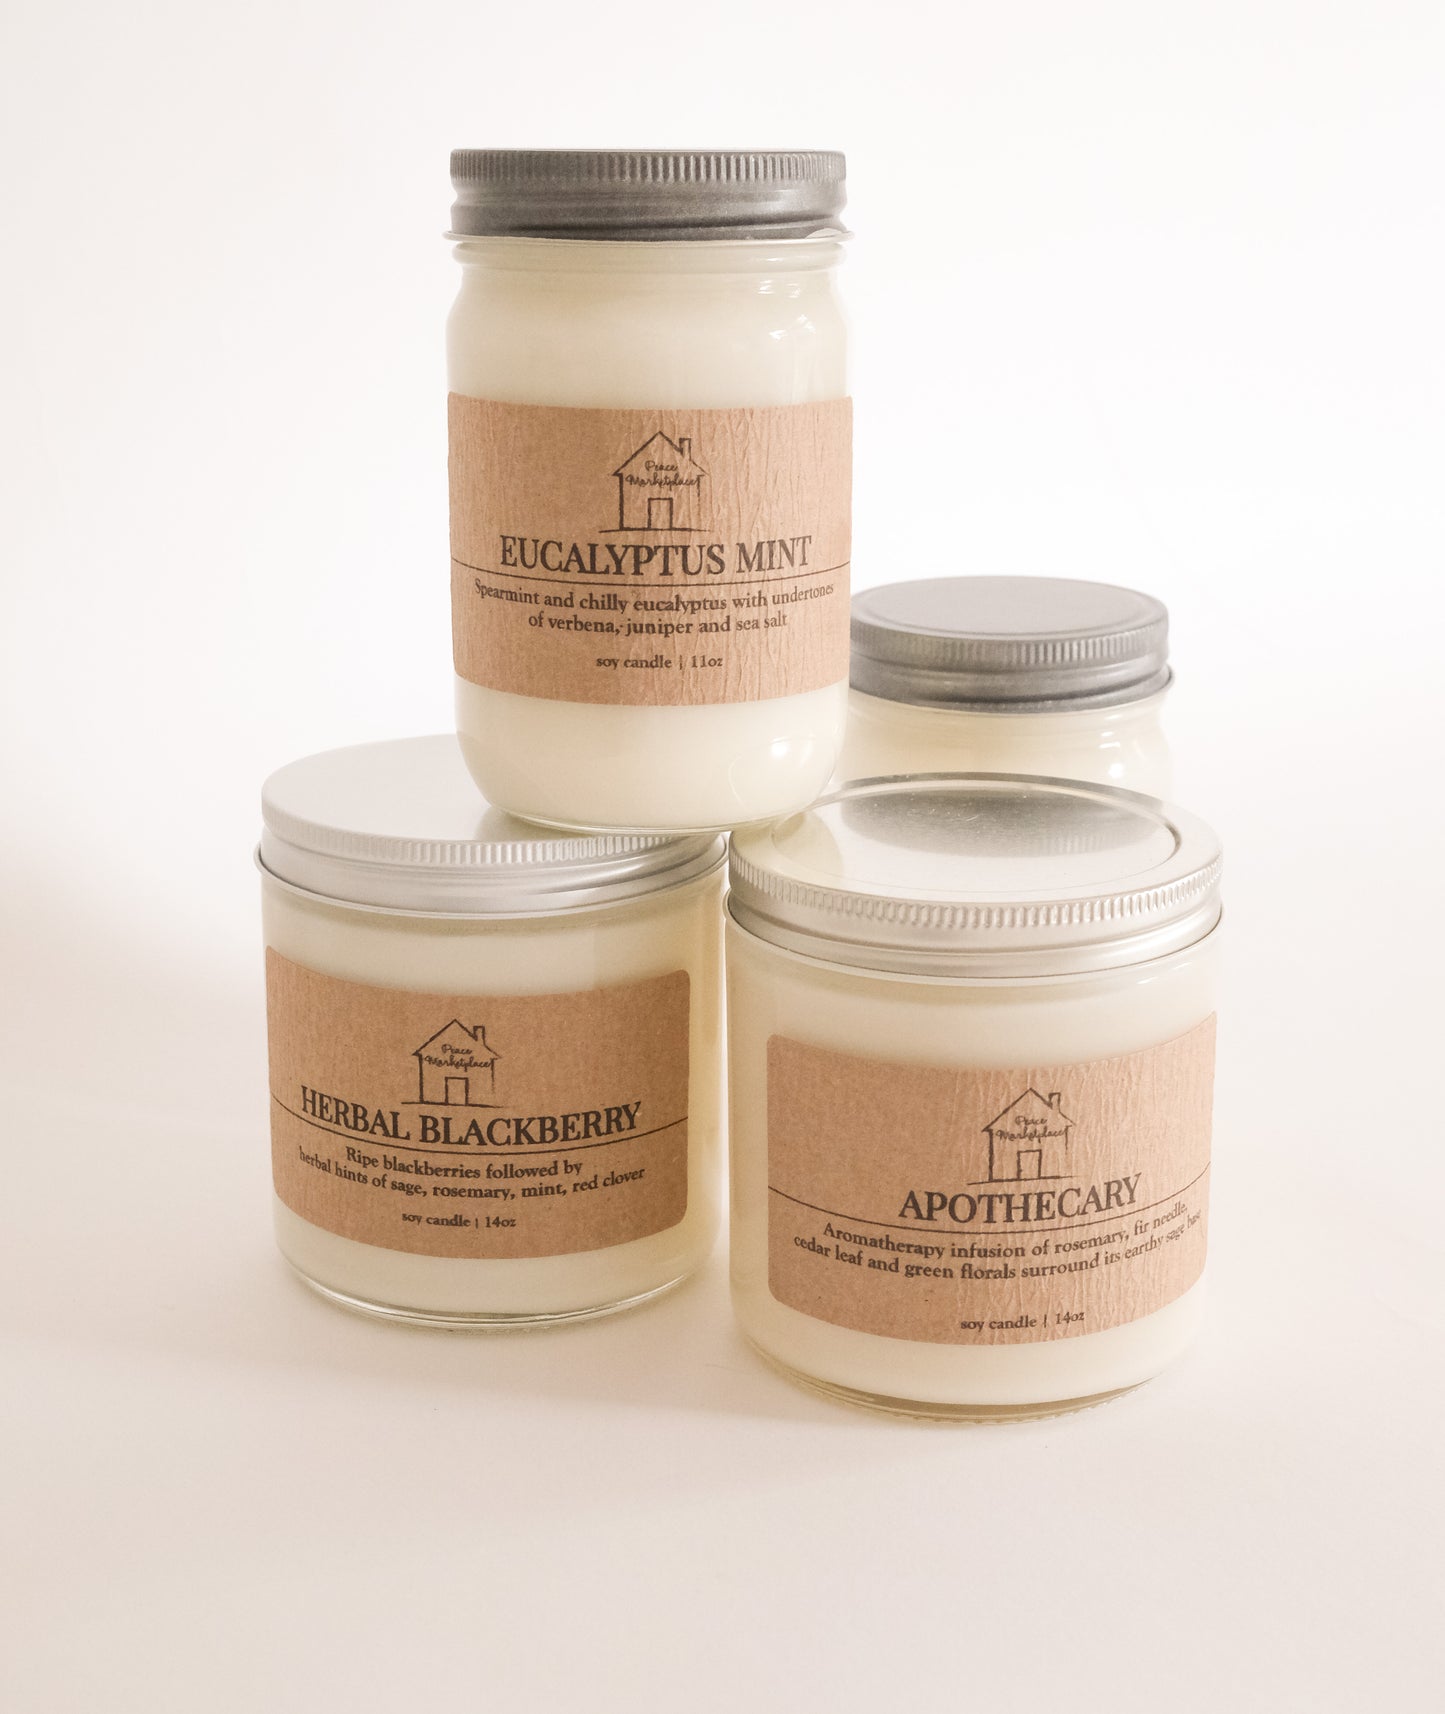 Peace Marketplace "Gardenia" 100% Soy Candle (available in 2 sizes)